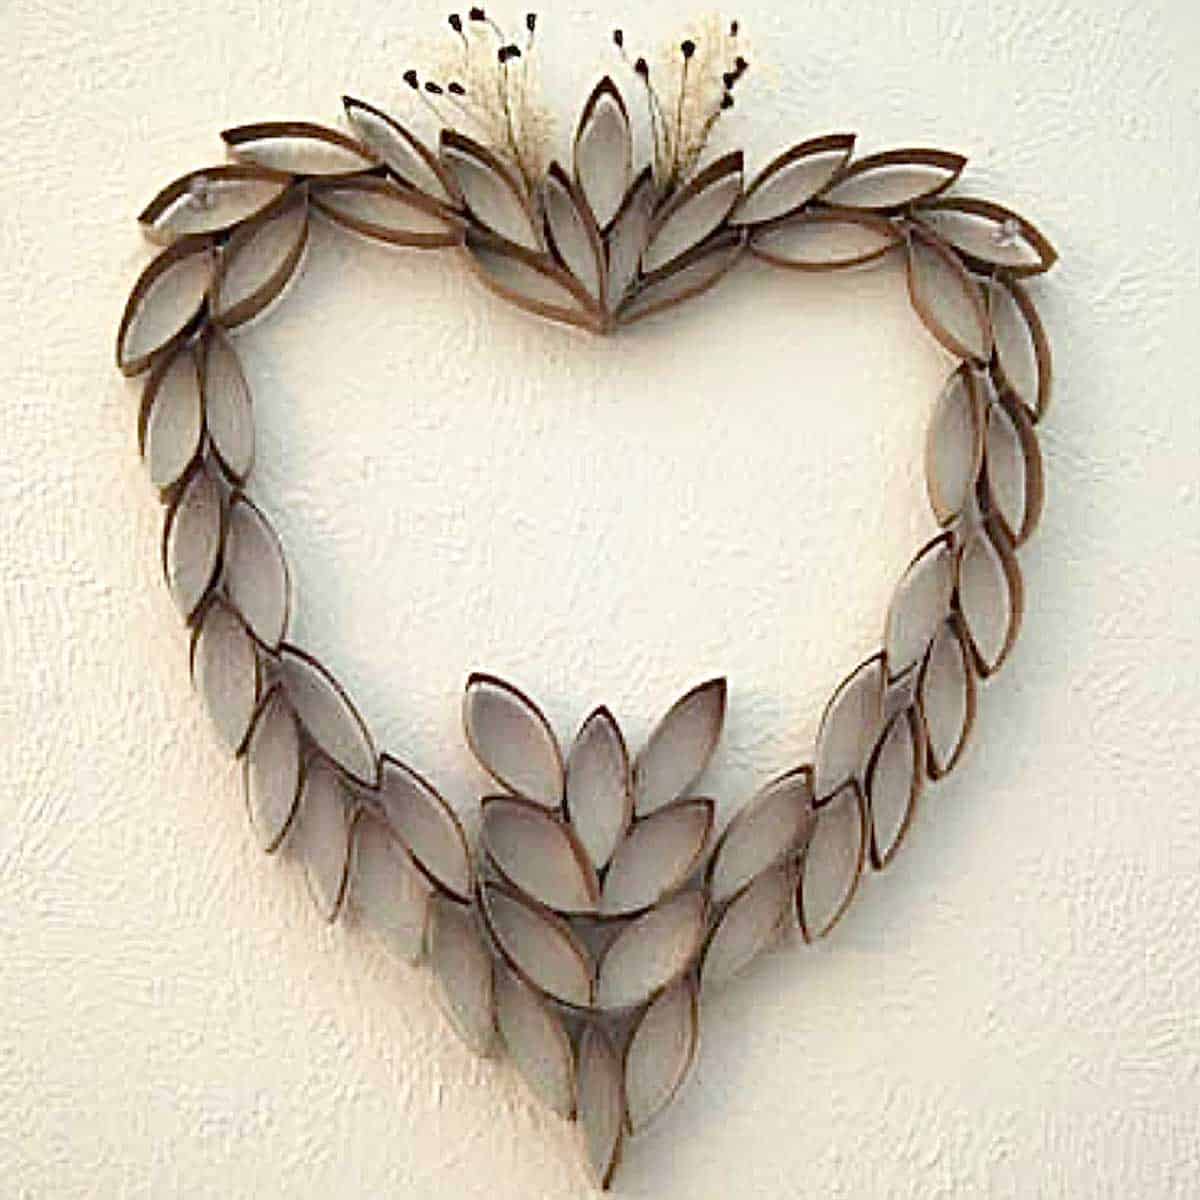 Make Your Own Heart Wall Decoration From Toilet Paper Tubes